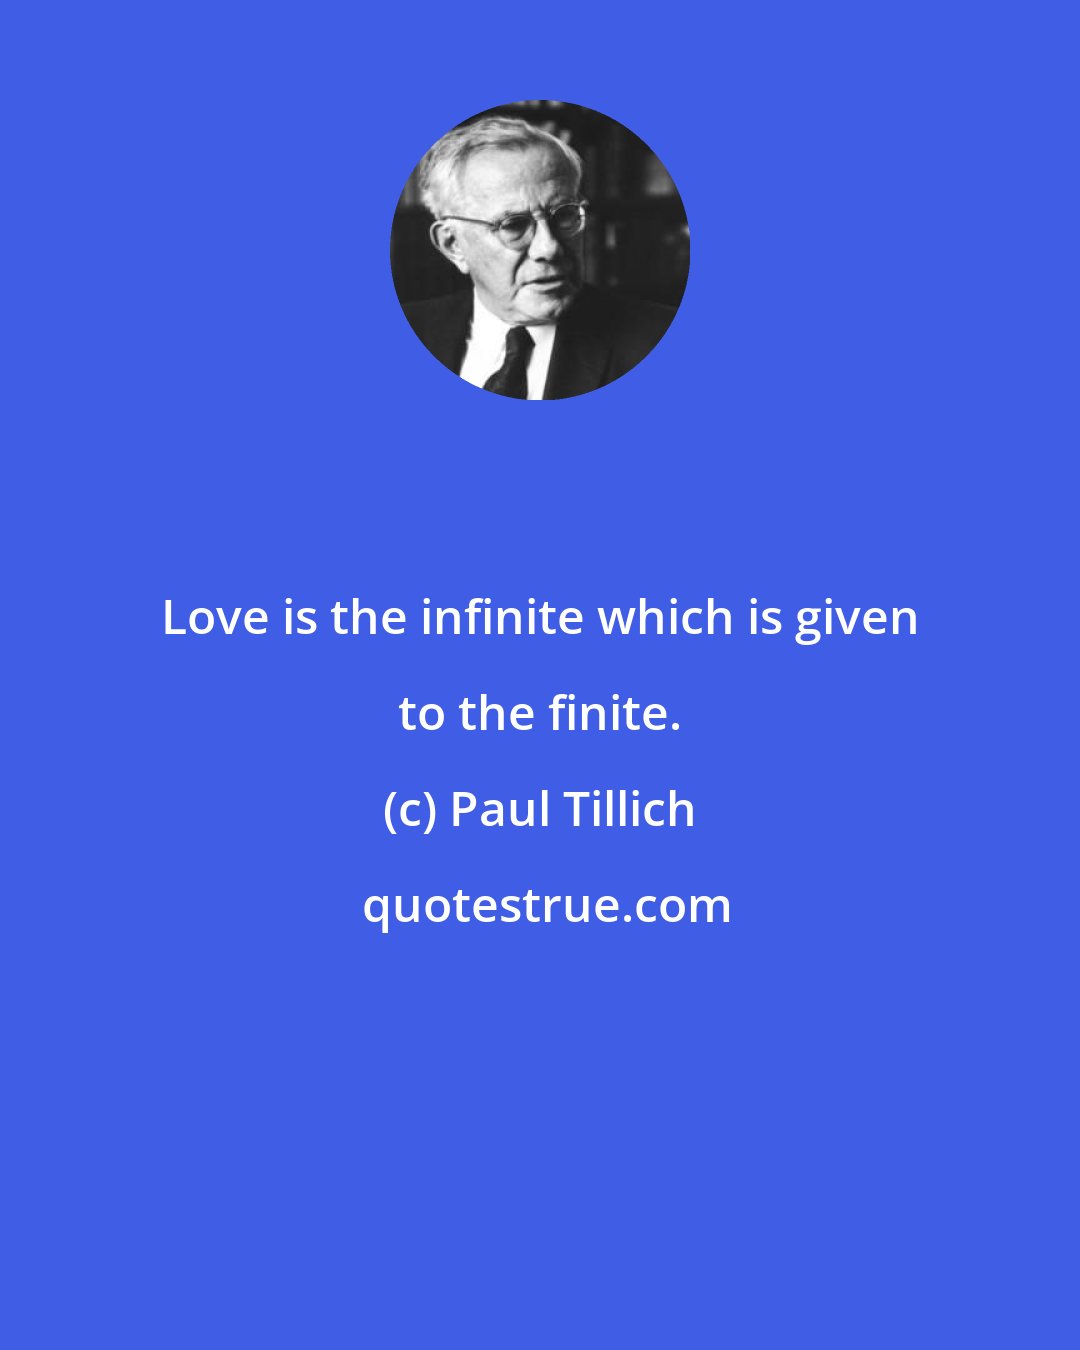 Paul Tillich: Love is the infinite which is given to the finite.